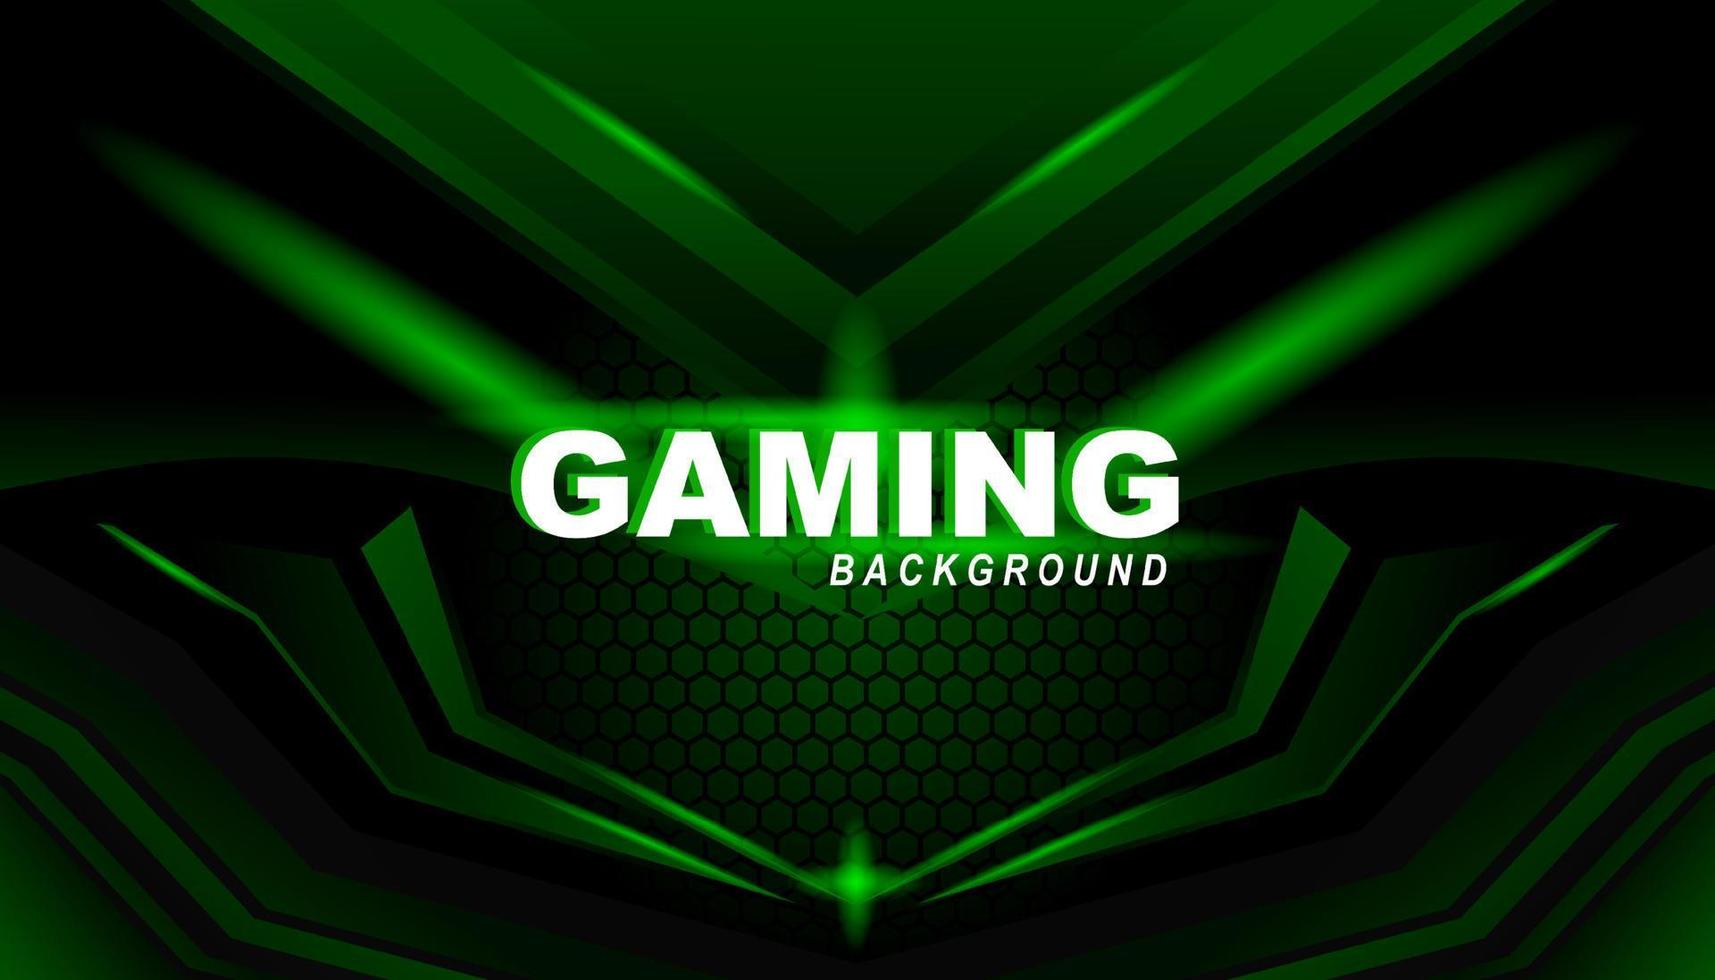 Abstract dark green Futuristic Gaming Background,dark green geometric background  for banner or Offline stream,gaming background template vector